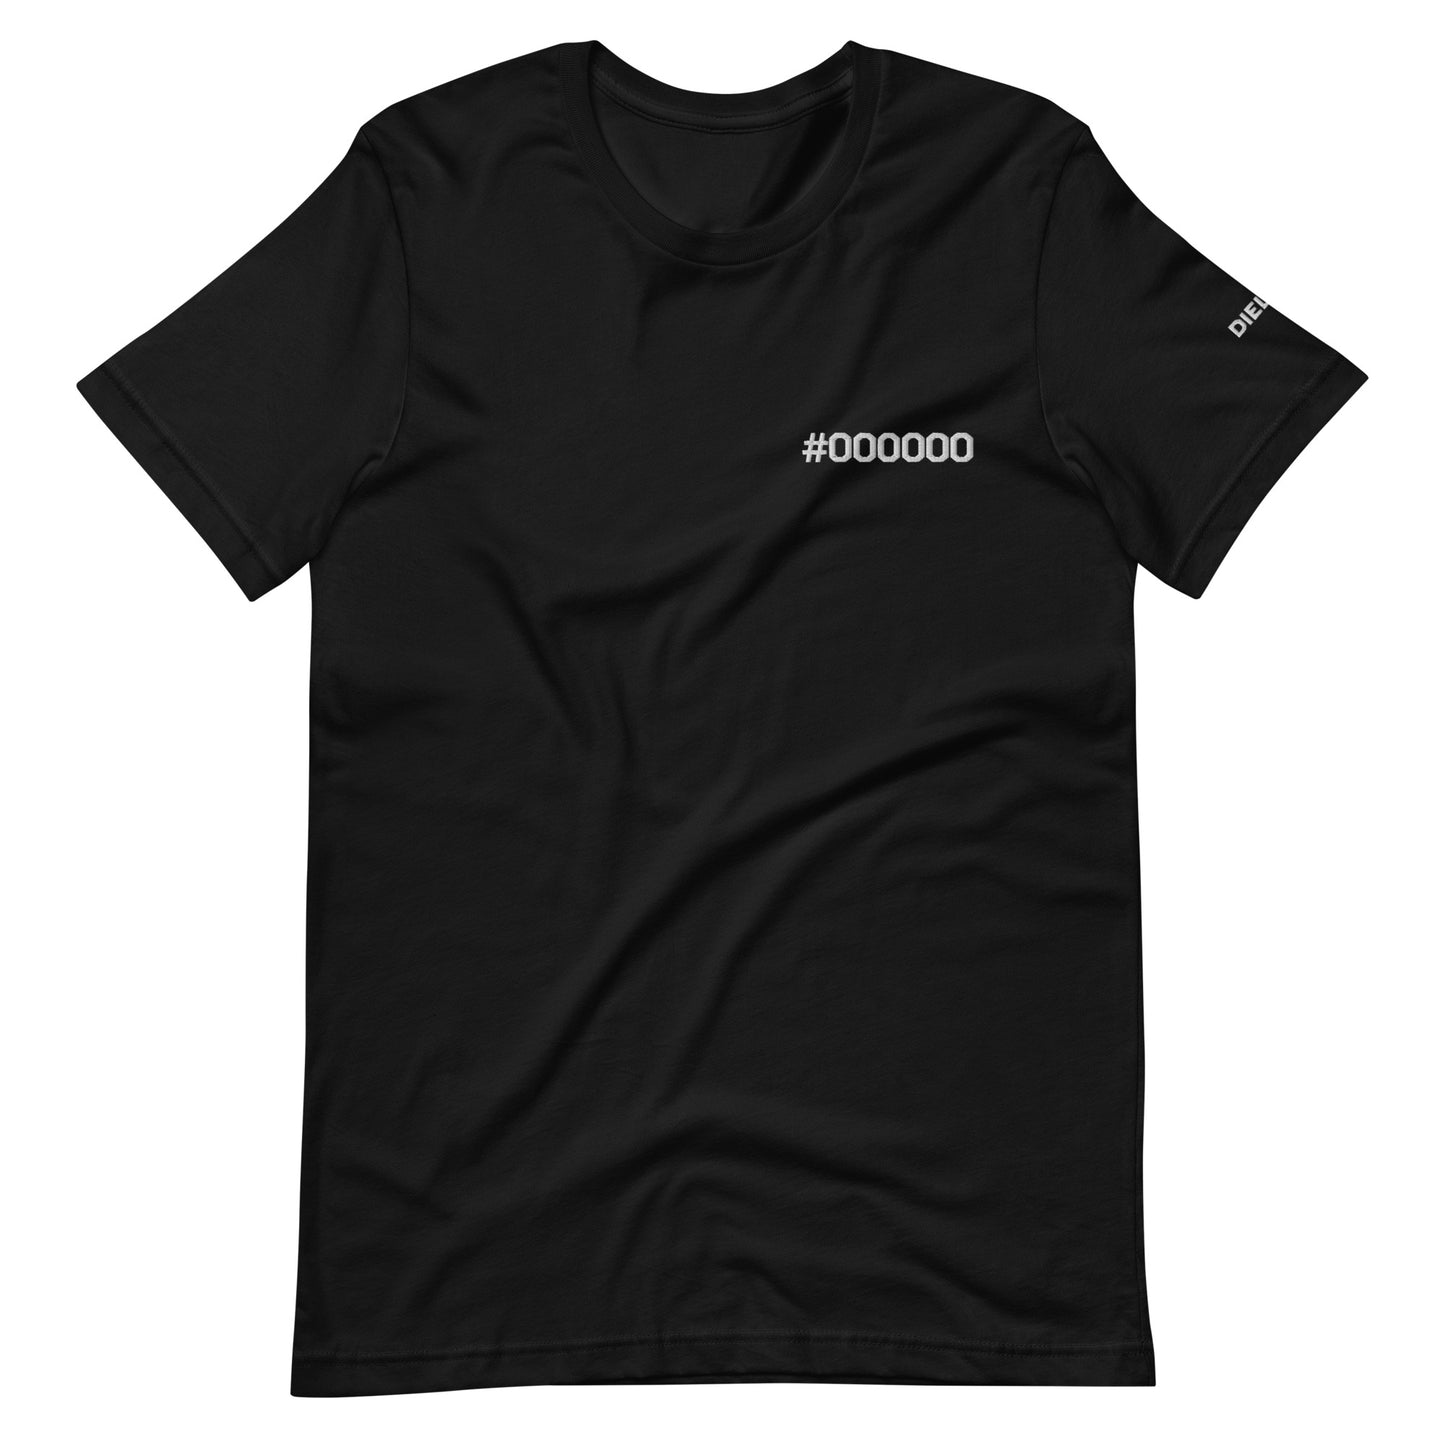 #000000 Embroidered Unisex t-shirt